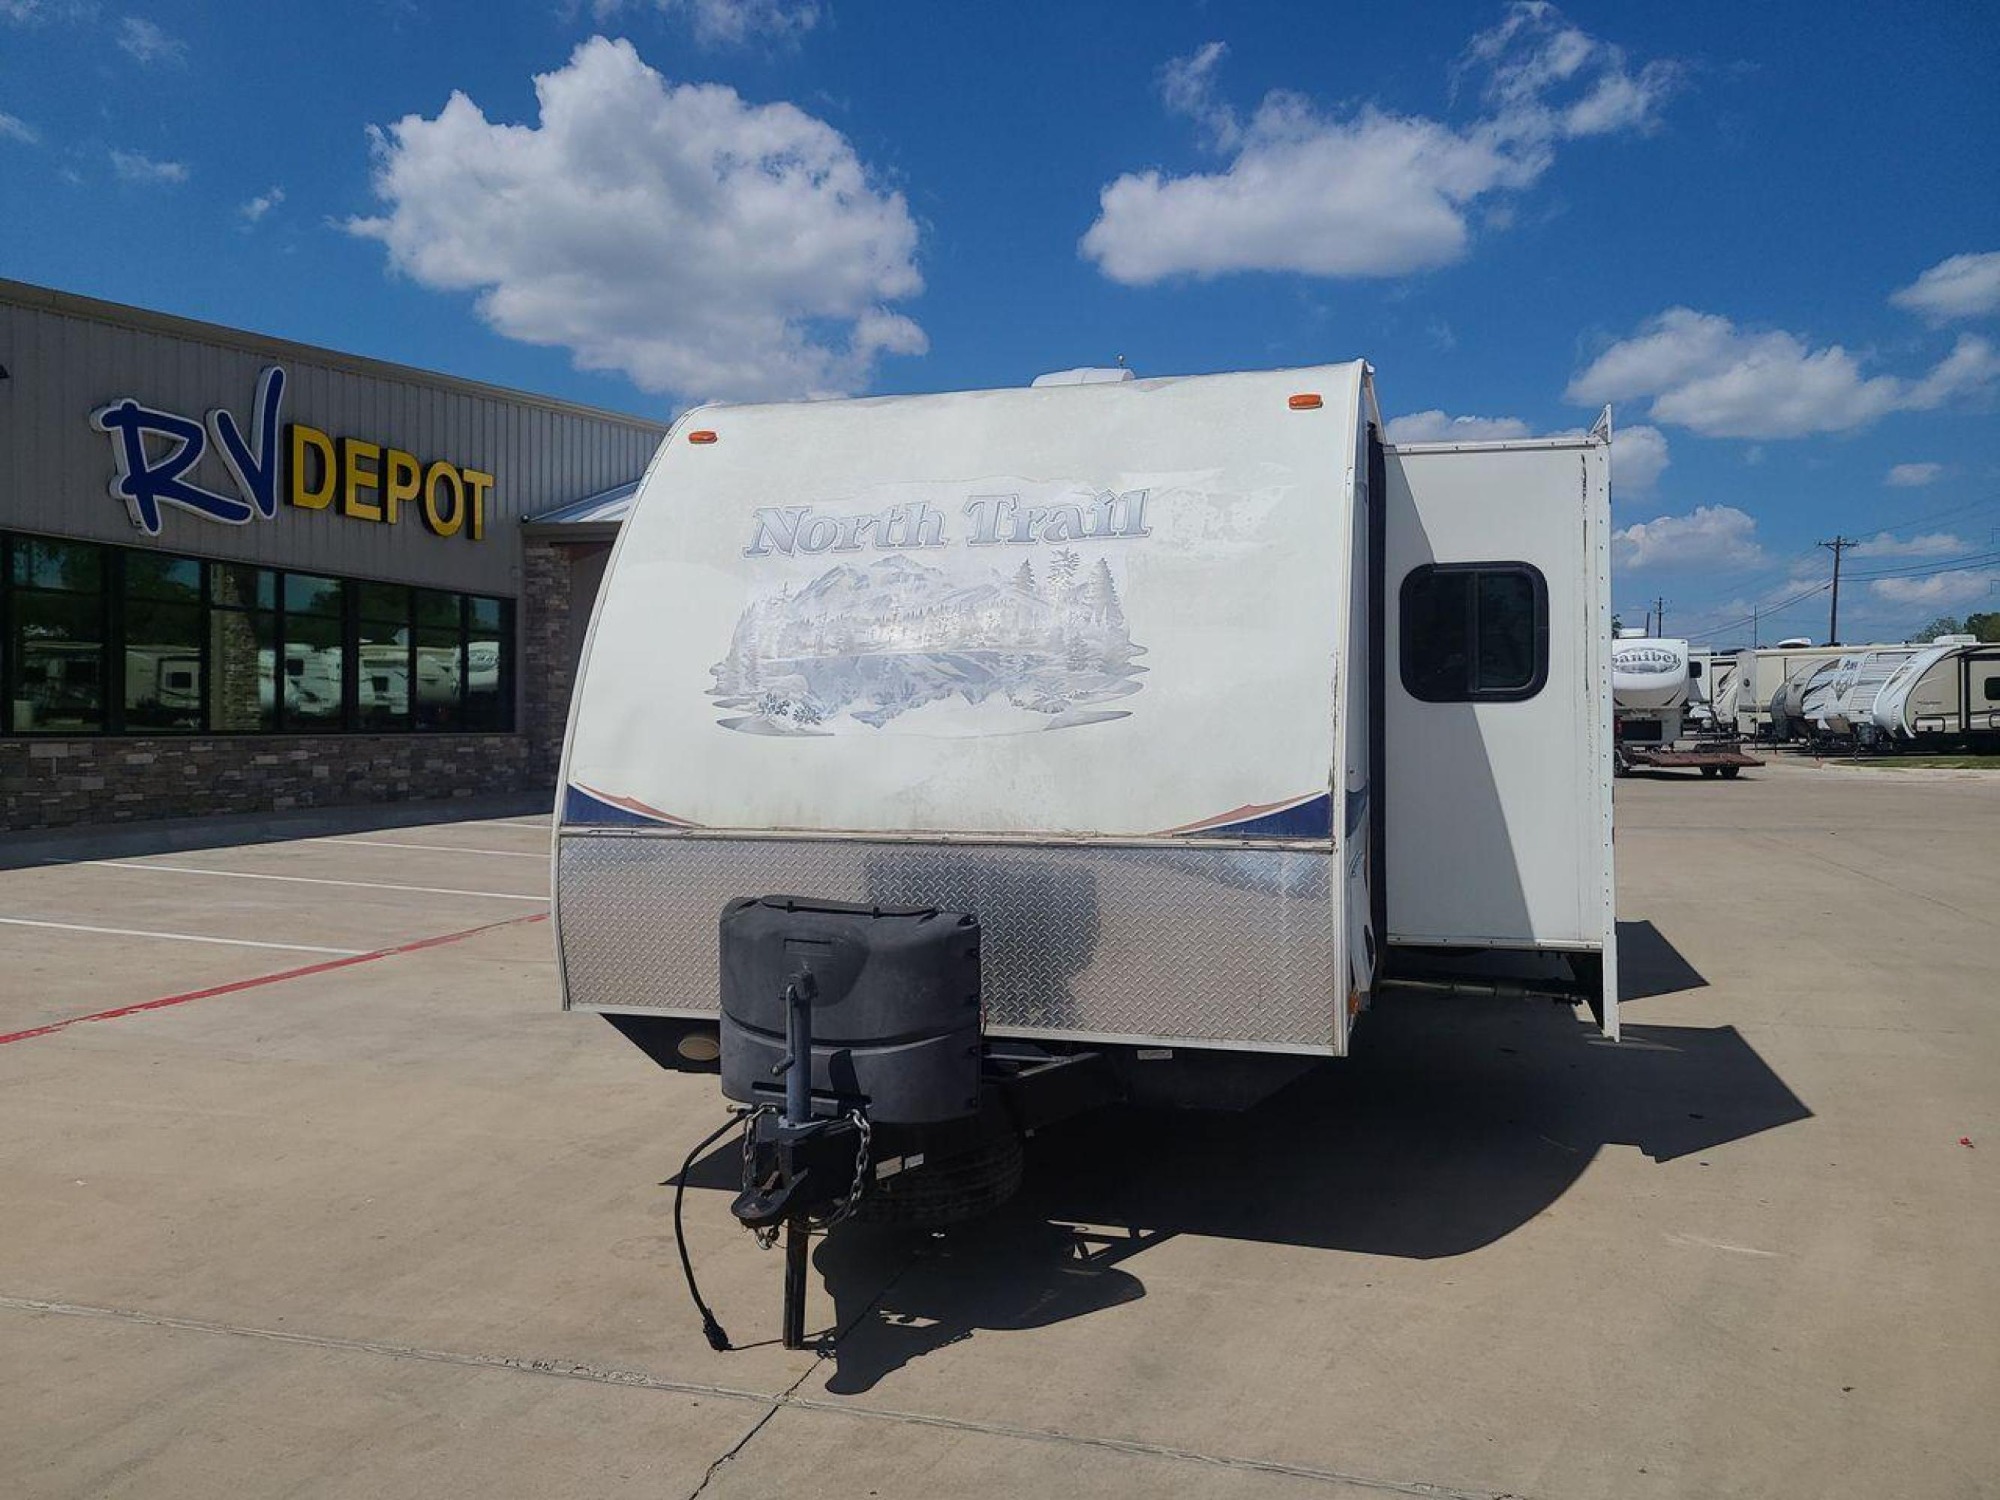 2011 WHITE HEARTLAND NORTH TRAIL 26B (5SFNB3225BE) , Length: 32.5 ft. | Dry Weight: 7,104 lbs. | Gross Weight: 8,600 lbs. | Slides: 2 transmission, located at 4319 N Main St, Cleburne, TX, 76033, (817) 678-5133, 32.385960, -97.391212 - Enjoy a spontaneous weekend getaway in this 2011 Heartland North Trail 26BRSS Travel Trailer! It is a dual-axle steel wheel setup measuring 32.5 ft. in length and 10.83 ft. in height. It has a dry weight of 7,104 lbs. and a GVWR of 8,600 lbs. It is equipped with automatic heating and cooling rated a - Photo #0